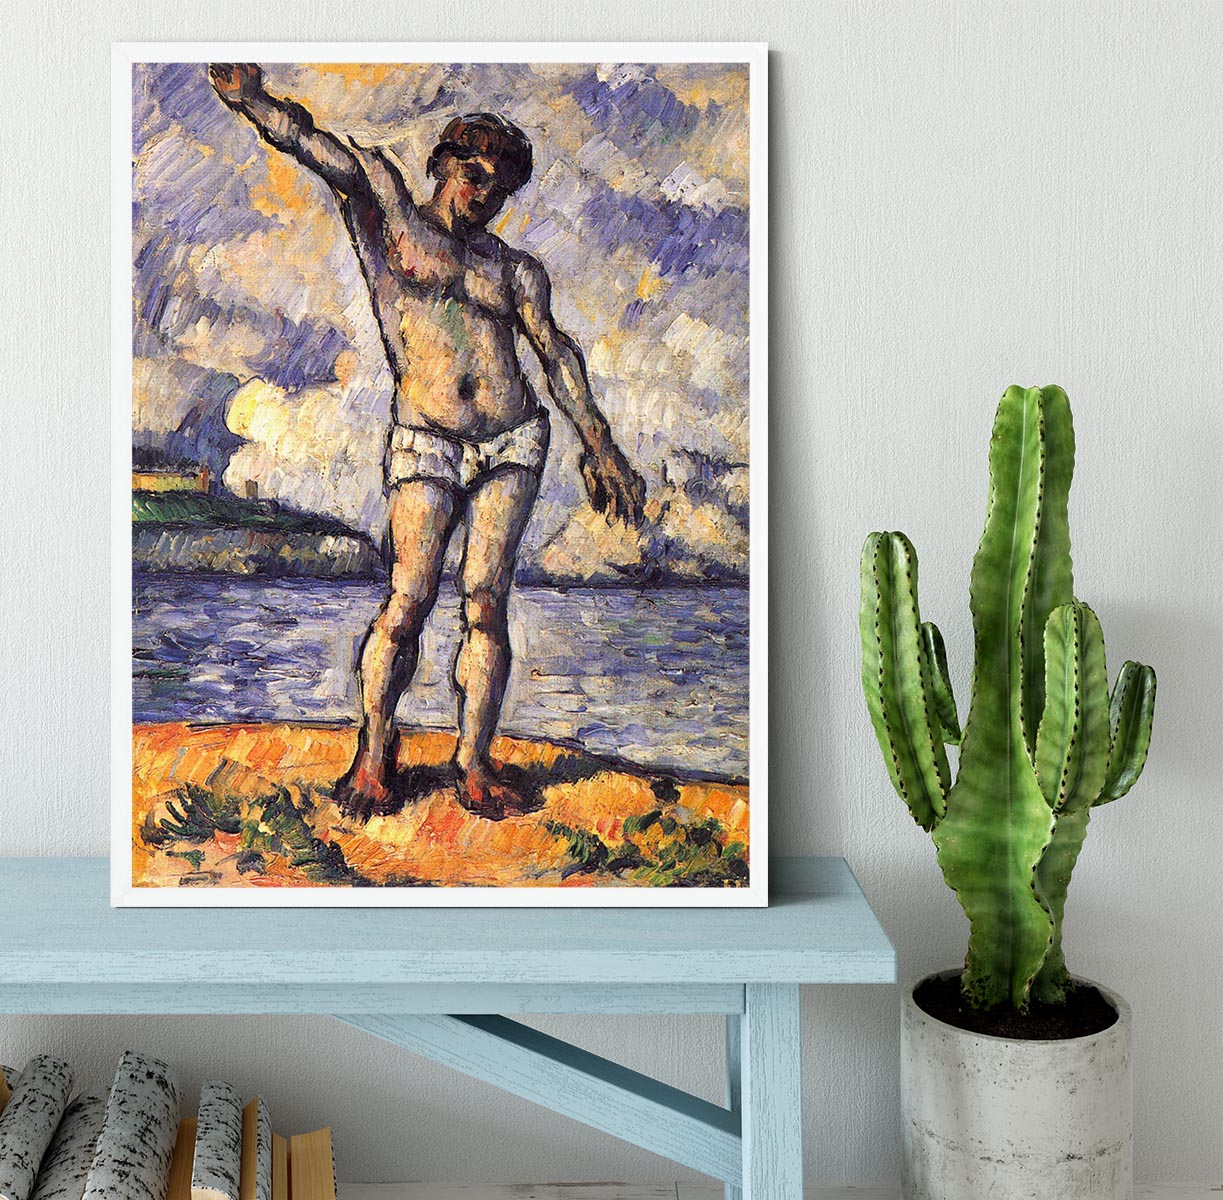 Swimmer with outstretched arms by Cezanne Framed Print - Canvas Art Rocks -6